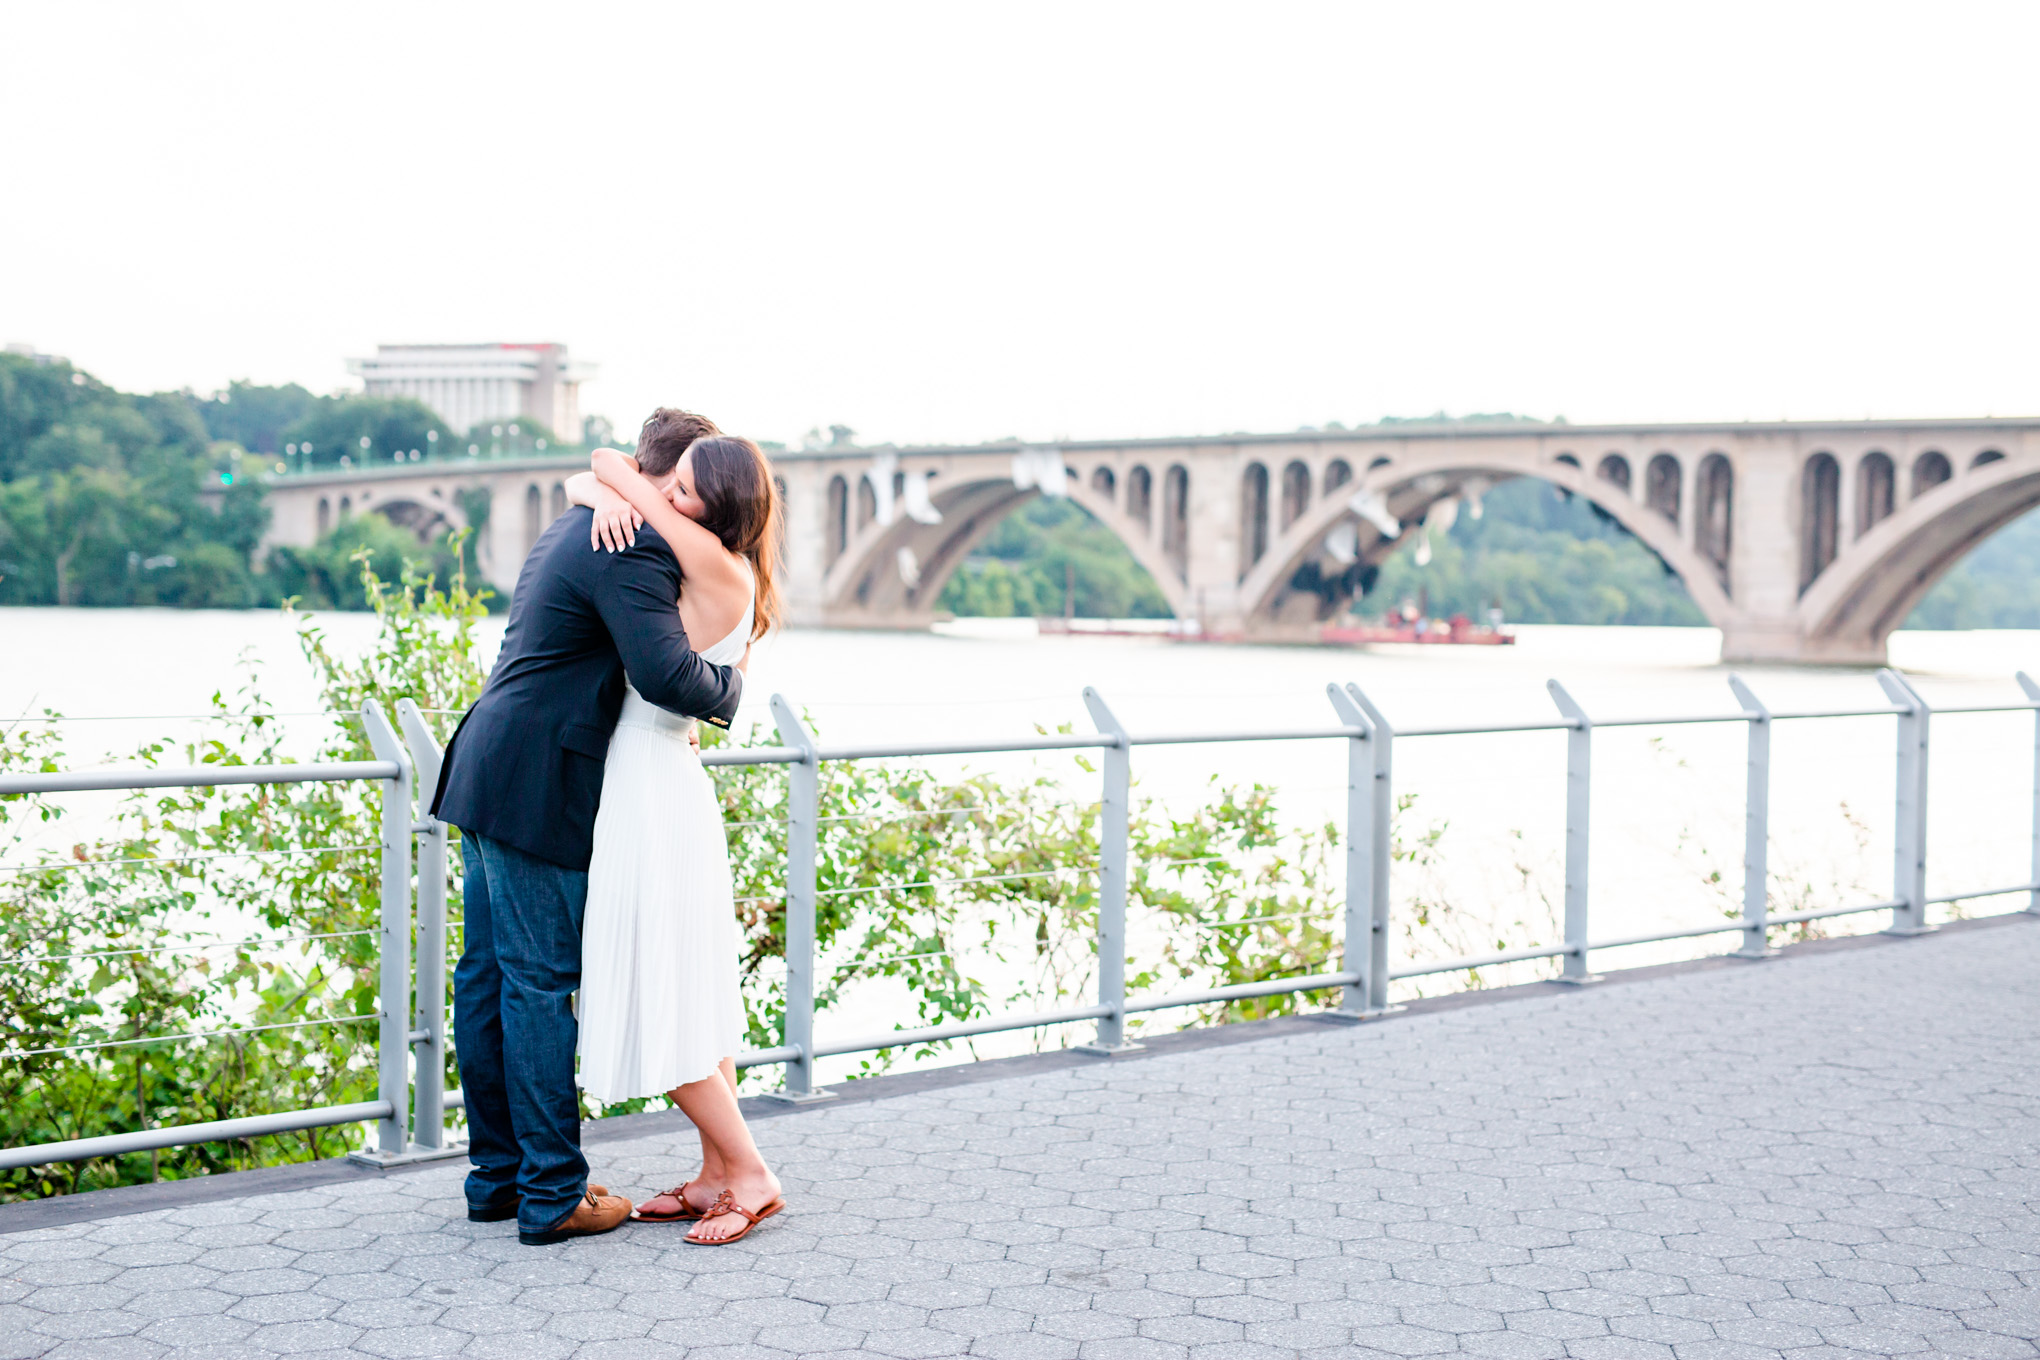 Georgetown waterfront engagement photos, Georgetown waterfront, engagement photos, engagement photo ideas, engagement photos style, D.C engagement photos, D.C. engagement photographer, D.C. wedding photographer, waterfront engagement photos, D.C. couple, sunset engagement photos, sunset portraits, D.C. portraits, romantic portraits, Rachel E.H. Photography, Georgetown, couple hugging, Key Bridge